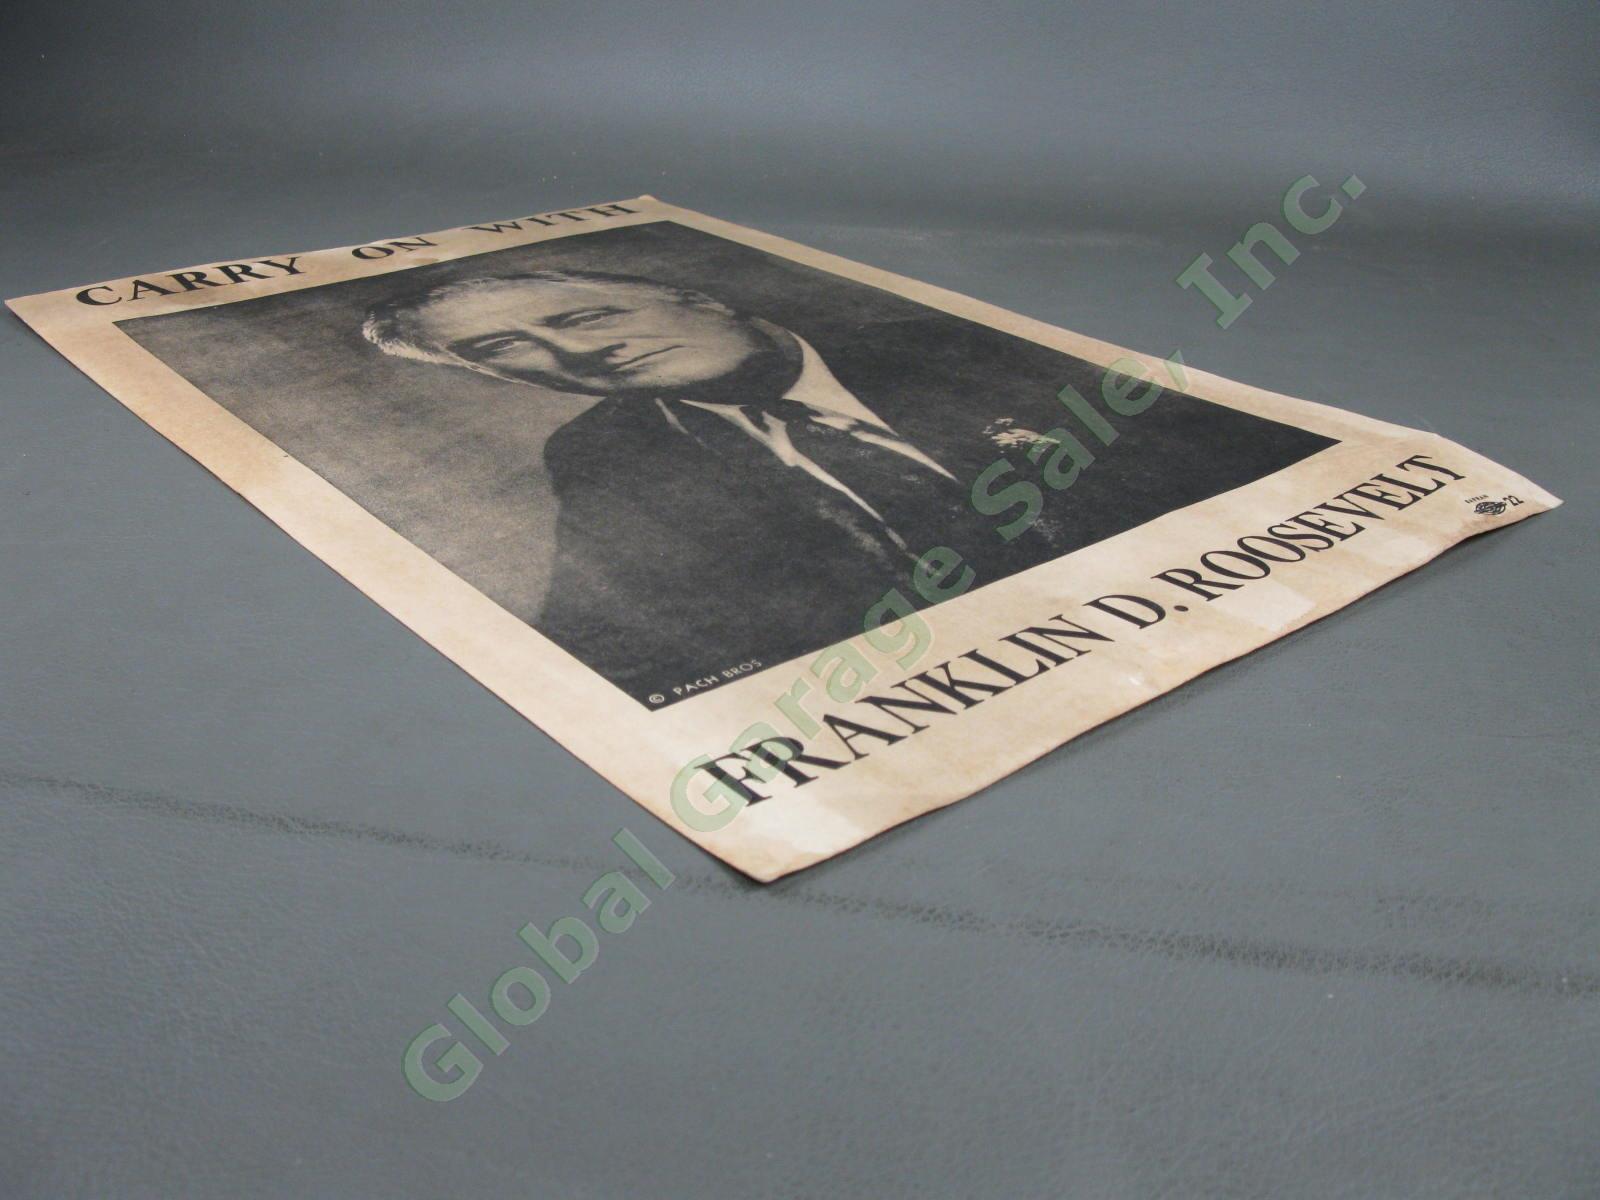 ORIGINAL 1936 President Campaign Poster CARRY ON WITH Franklin D Roosevelt FDR 1